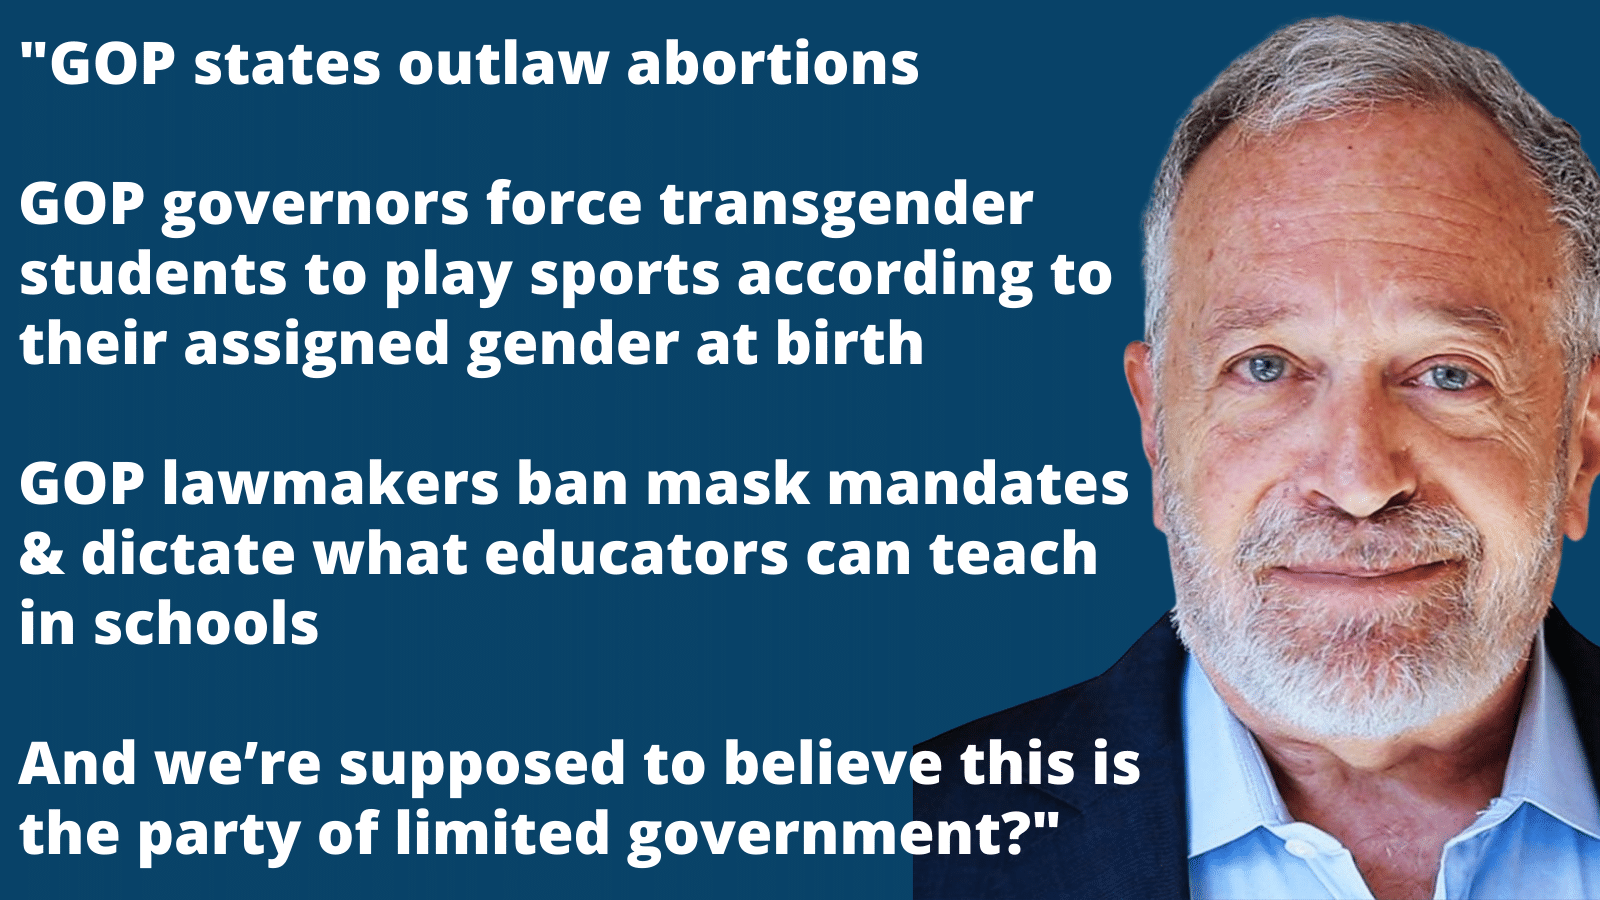 Robert Reich: ''GOP states outlaw abortions   GOP governors force transgender students to play sports according to their assigned gender at birth   GOP lawmakers ban mask mandates & dictate what educators can teach in schools   And we’re supposed to believe this is the party of limited government?''''GOP states outlaw abortions   GOP governors force transgender students to play sports according to their assigned gender at birth   GOP lawmakers ban mask mandates & dictate what educators can teach in schools   And we’re supposed to believe this is the party of limited government?''